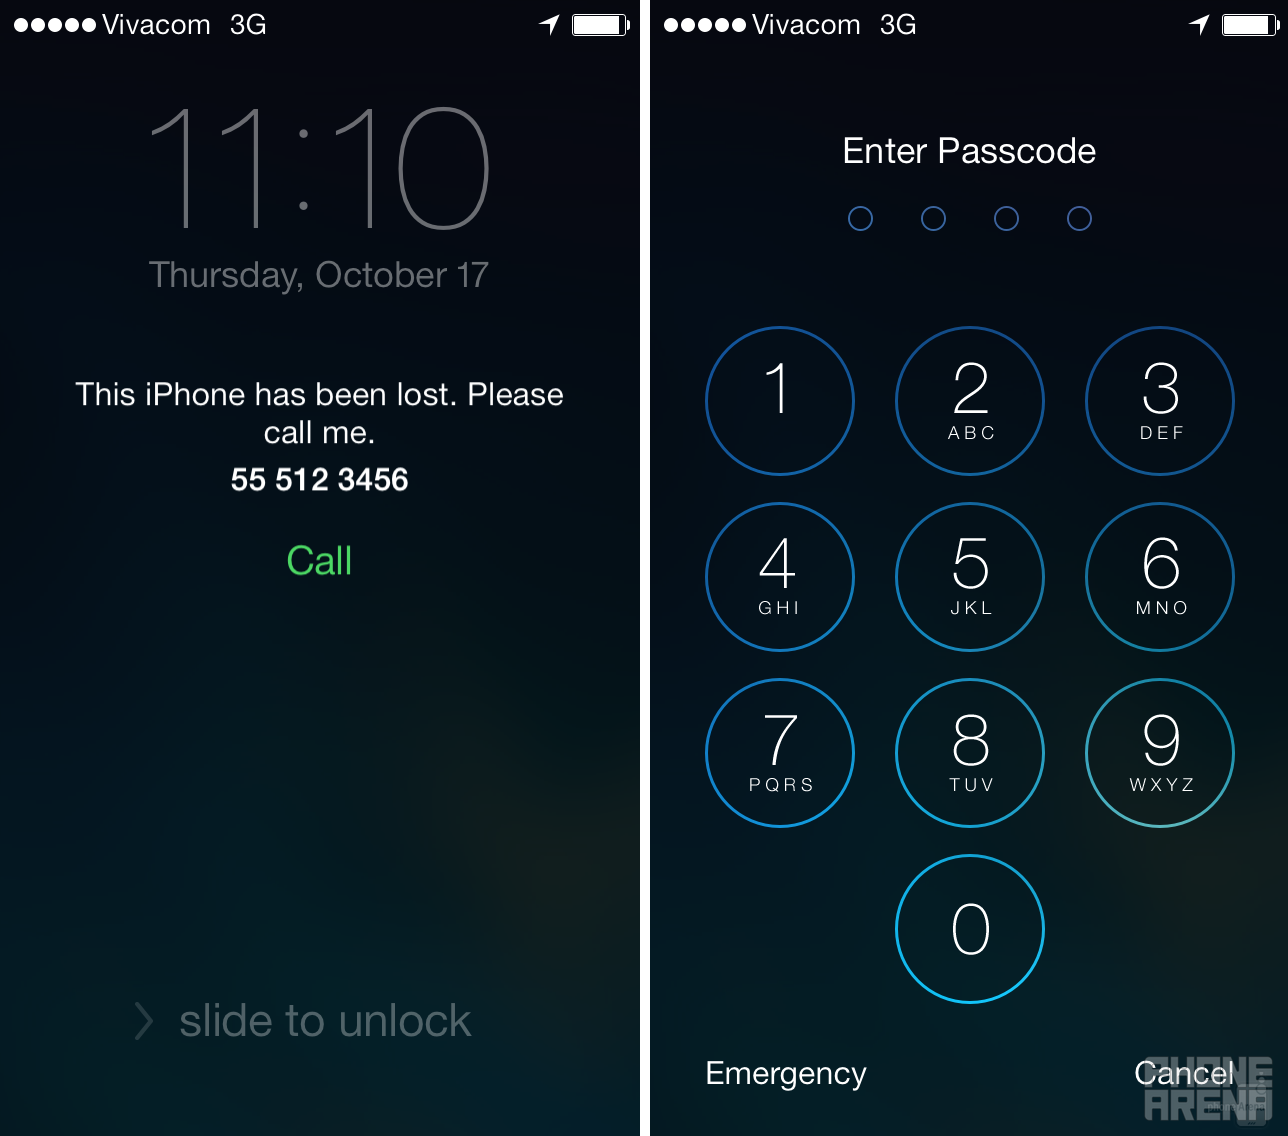 How to protect your iOS 7 device against theft